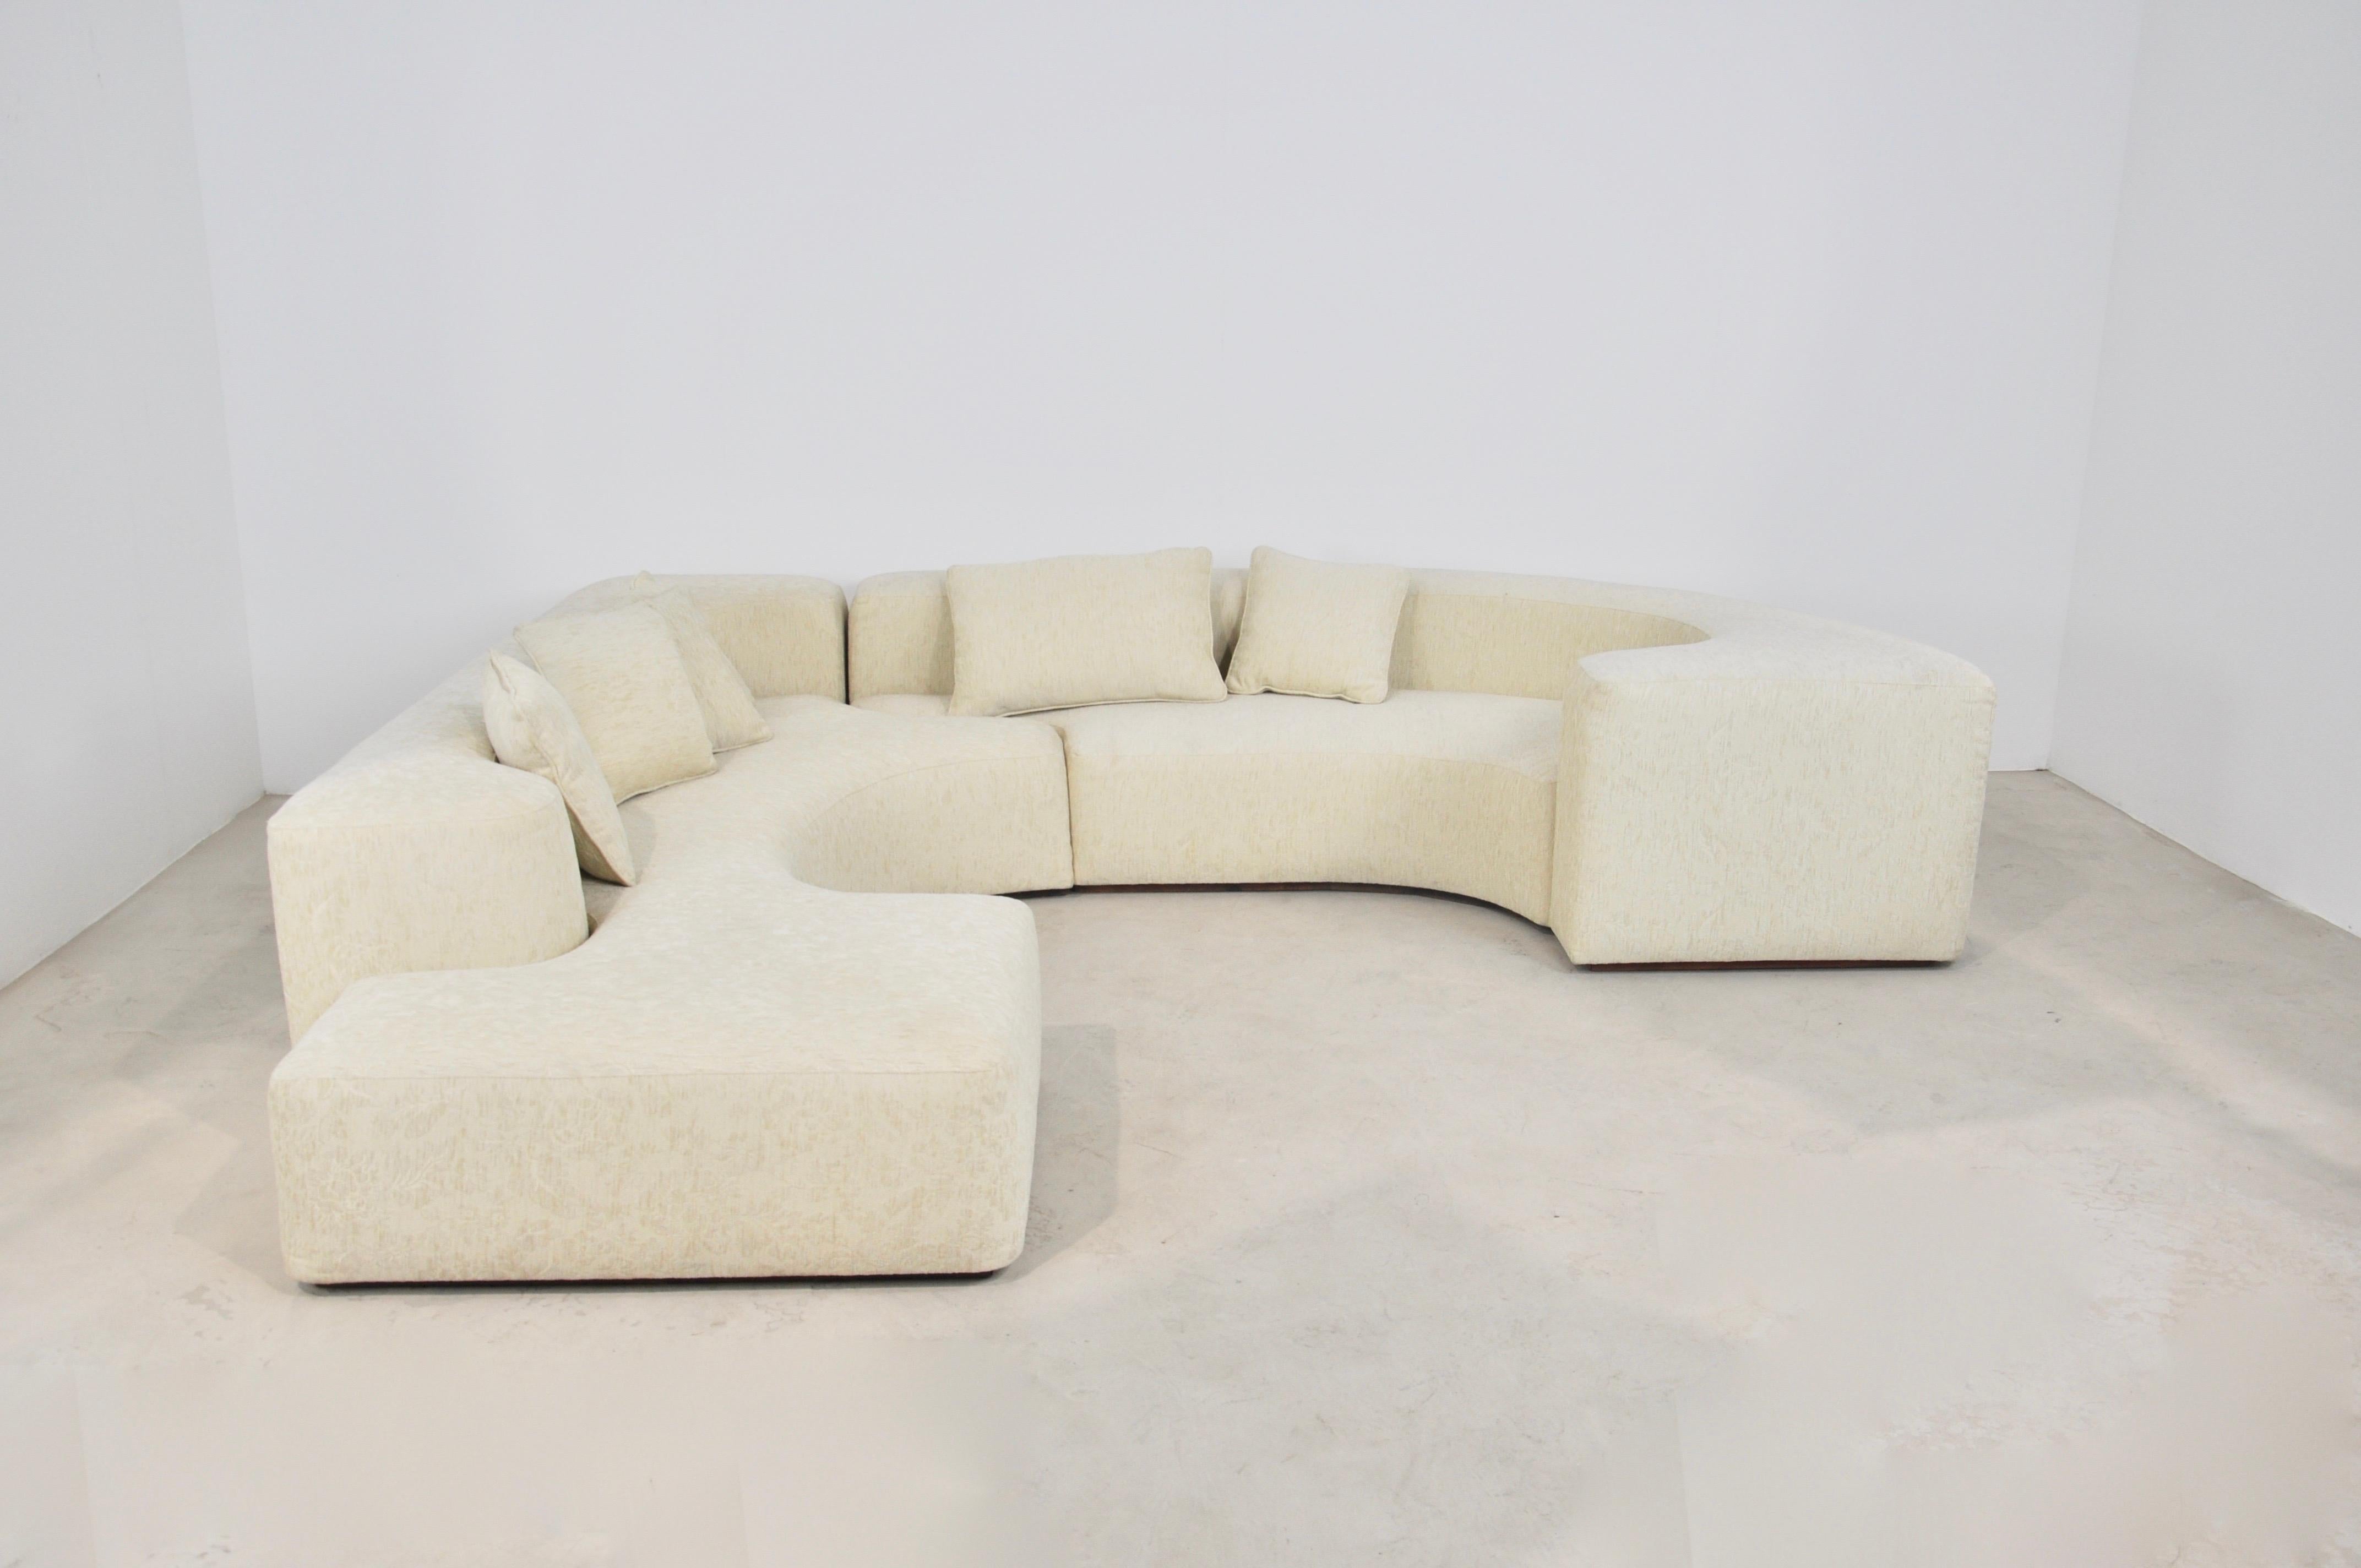 Sofa composed of two fabric elements and 6 cushions. Measures: Seat height 36cm.